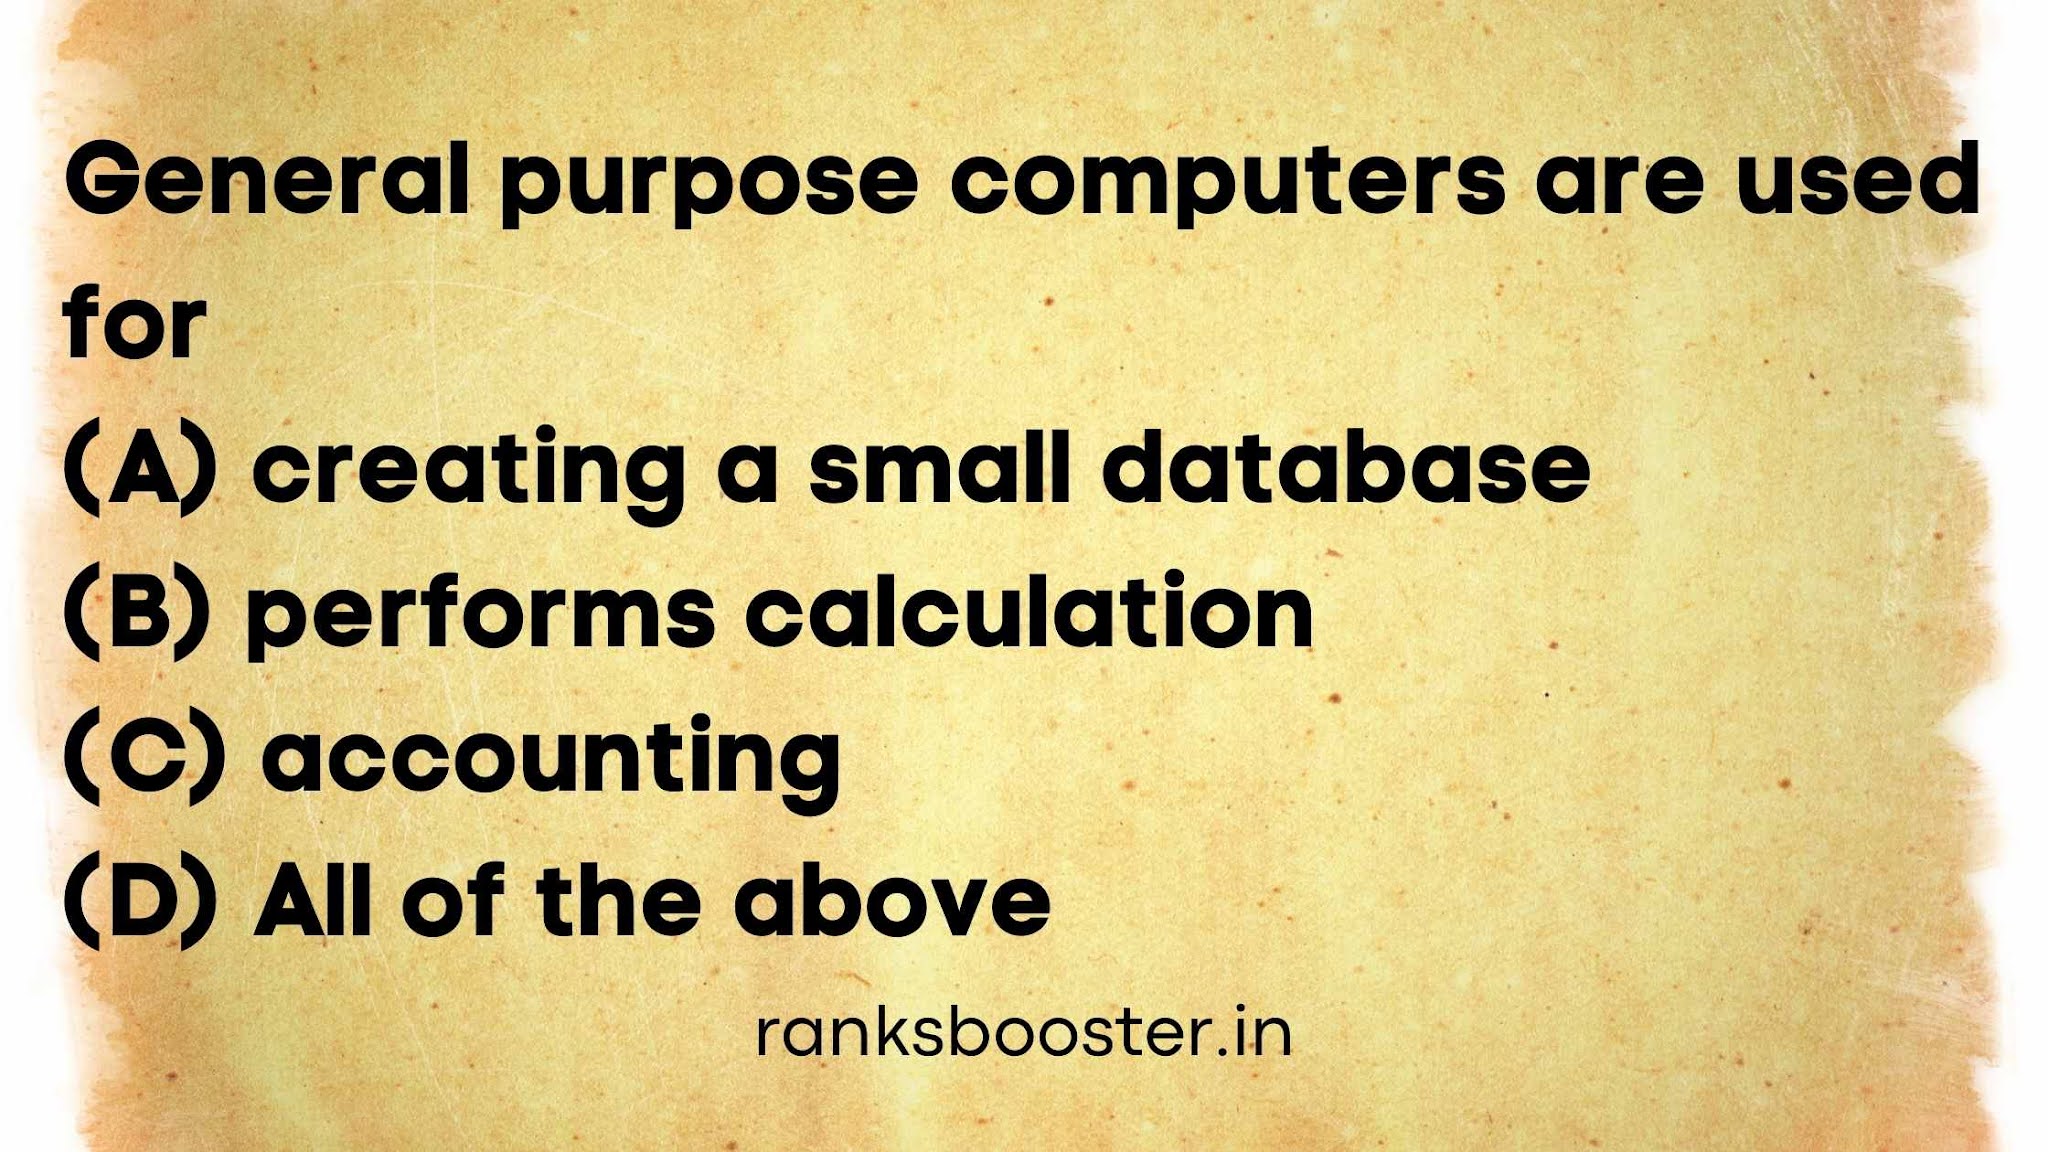 General purpose computers are used for (A) creating a small database (B) performs calculation (C) accounting (D) All of the above